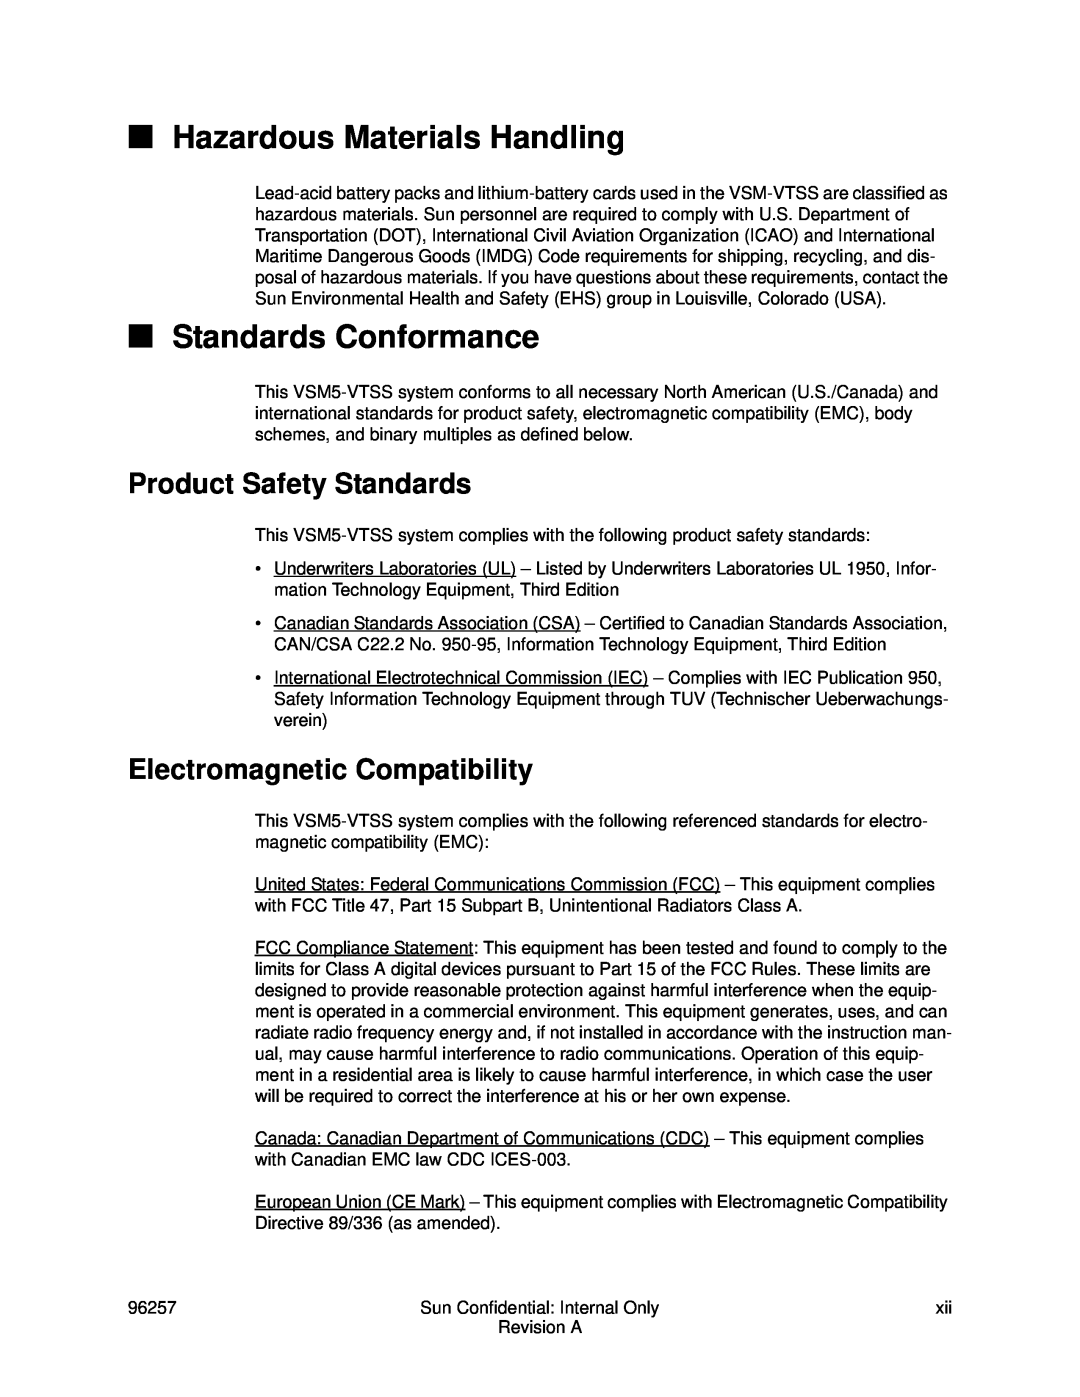 Sun Microsystems 96257 manual Hazardous Materials Handling, Standards Conformance, Product Safety Standards 